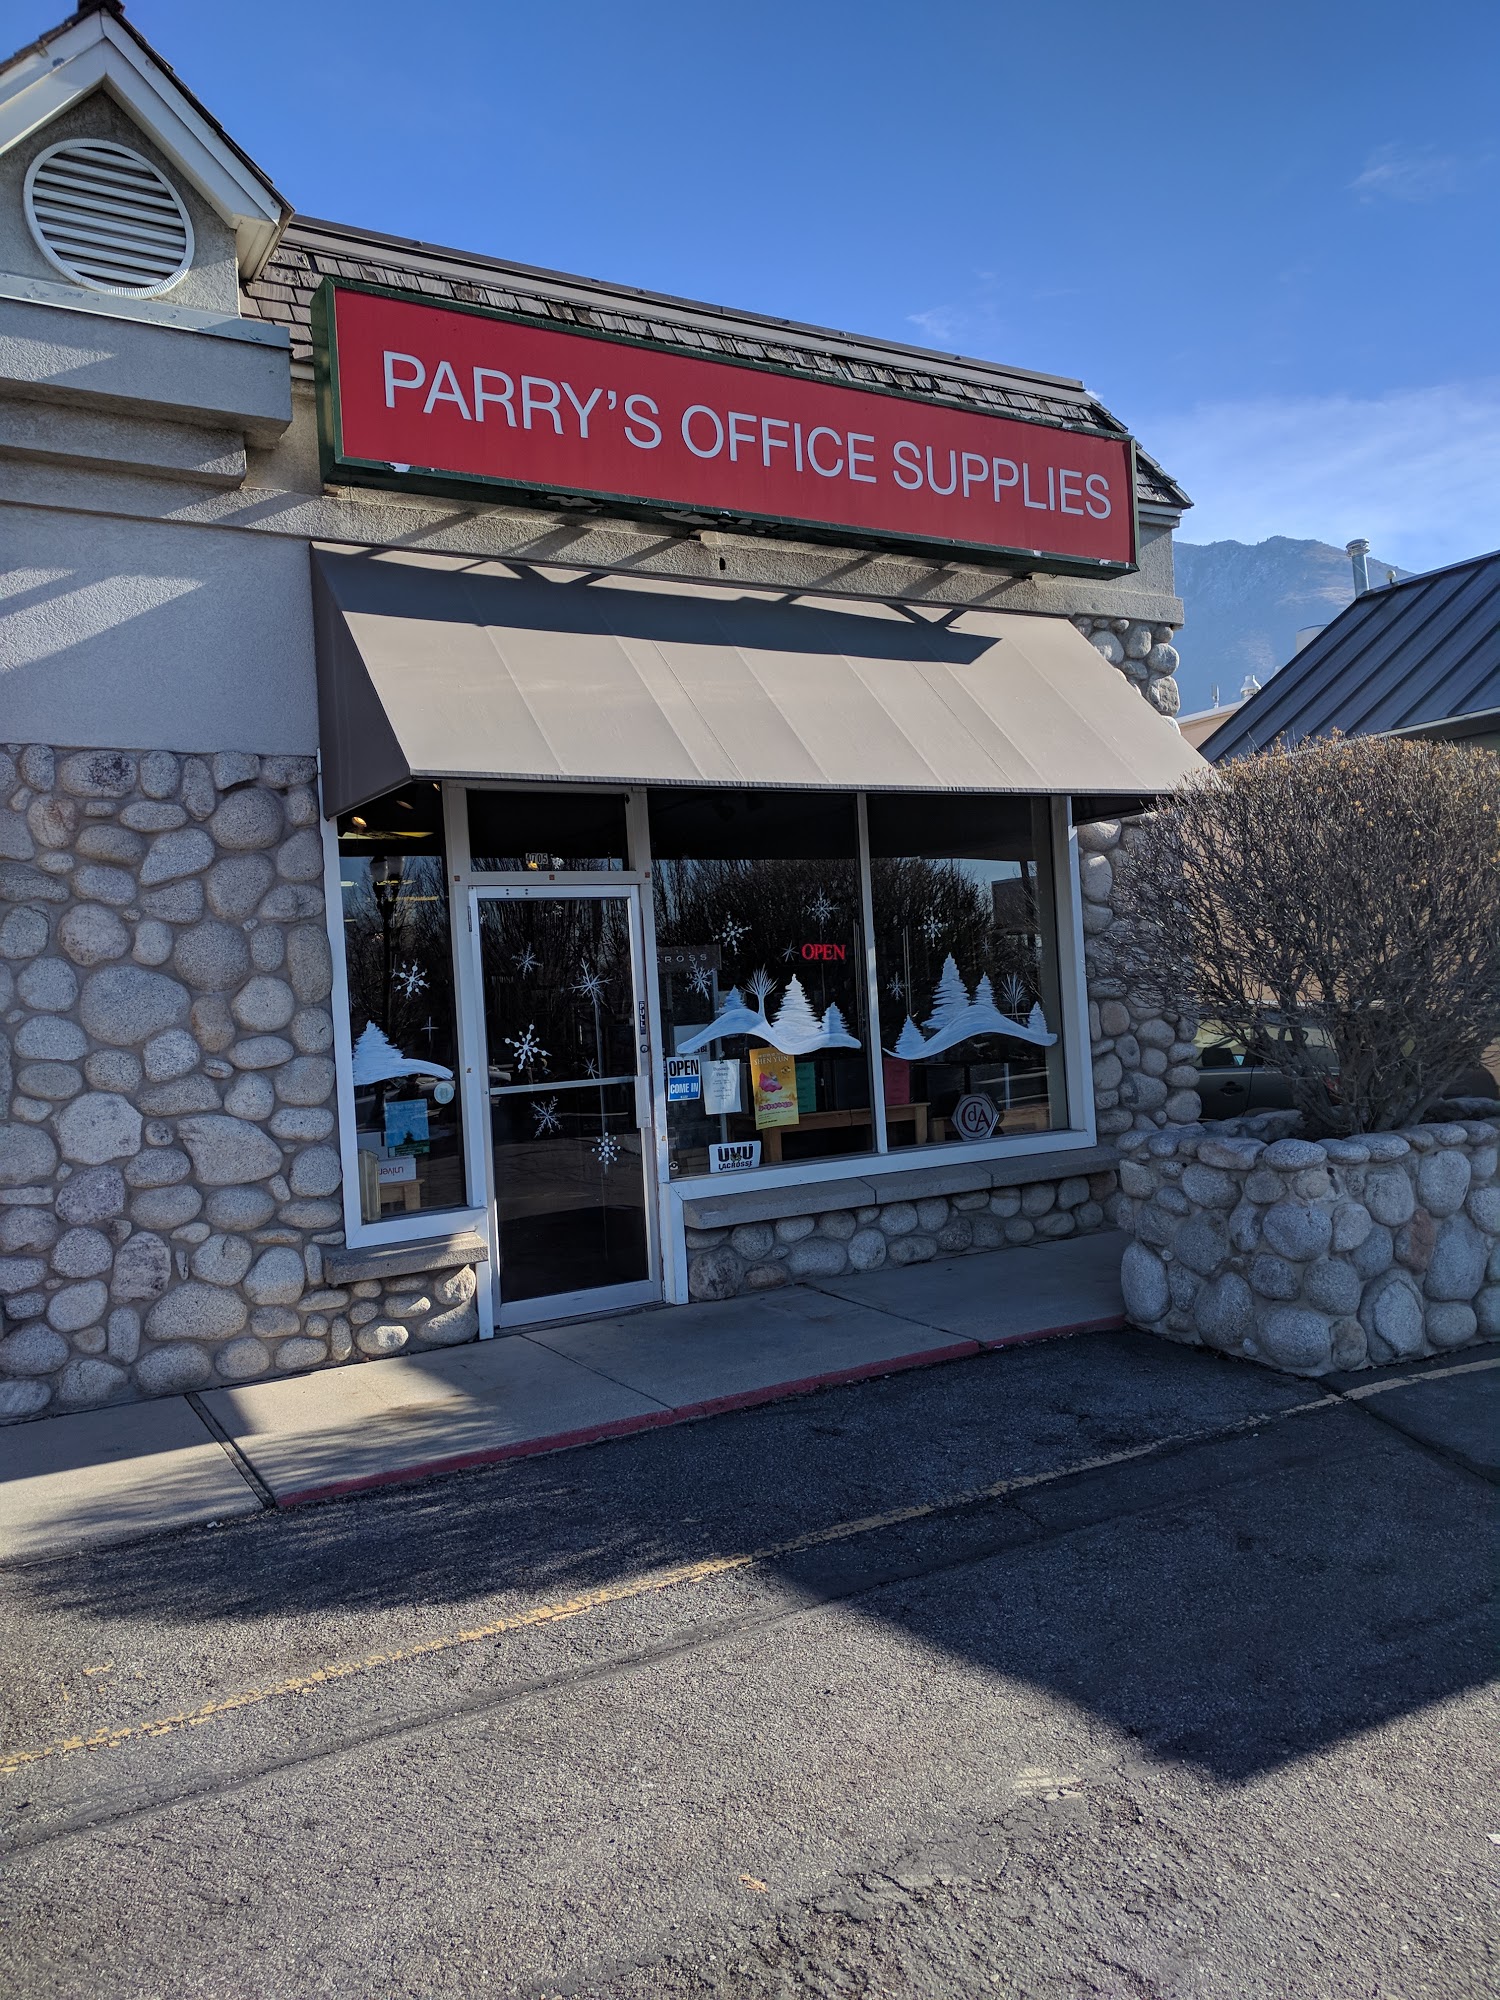 Parry's Office Supplies